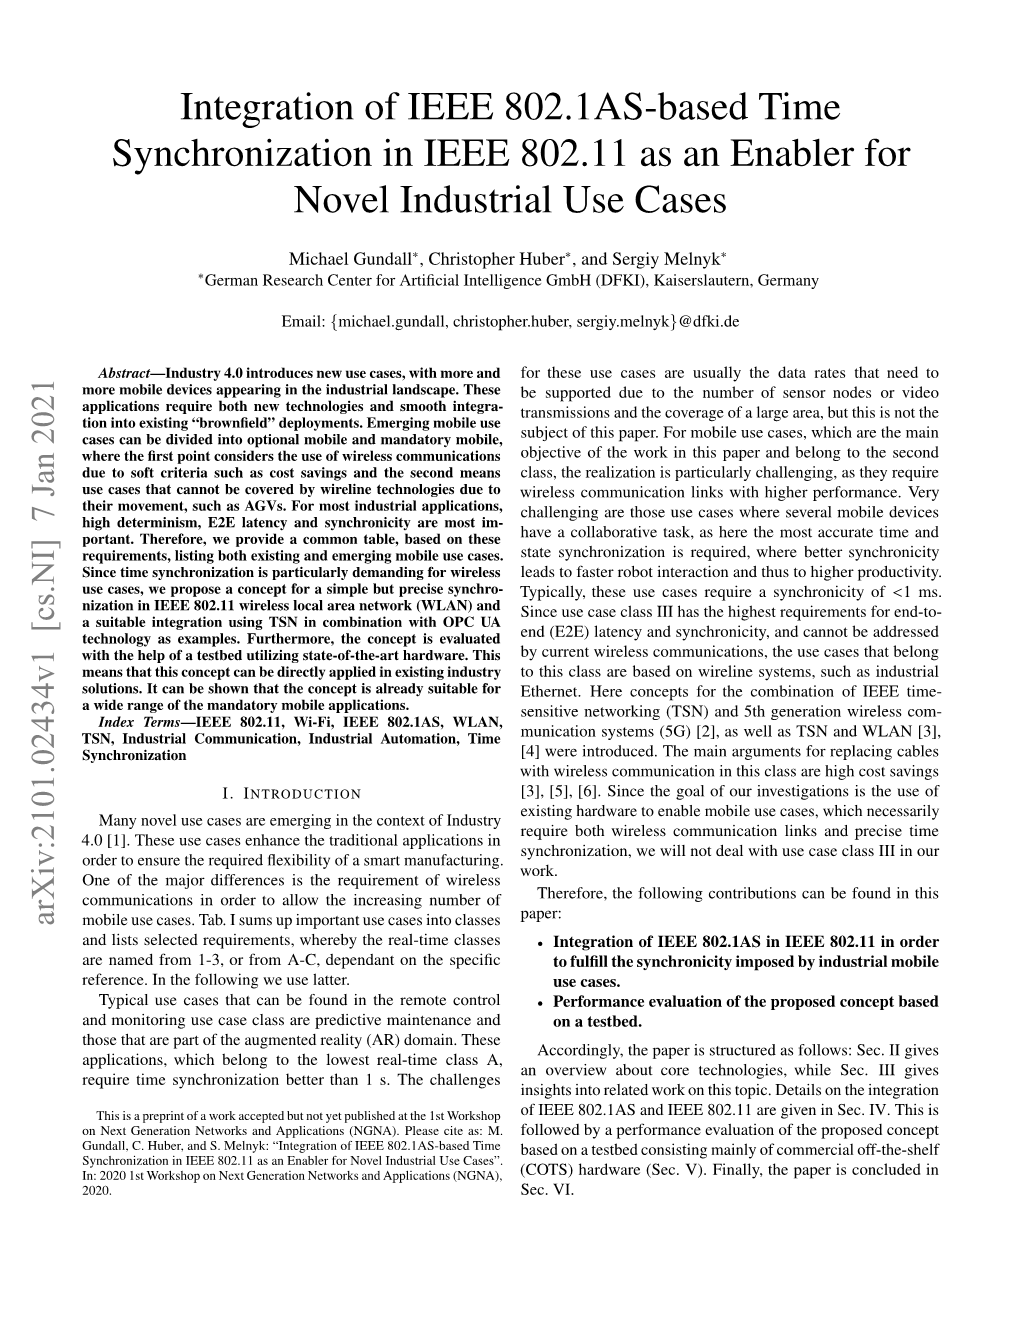 Integration of IEEE 802.1AS-Based Time Synchronization in IEEE 802.11 As an Enabler for Novel Industrial Use Cases